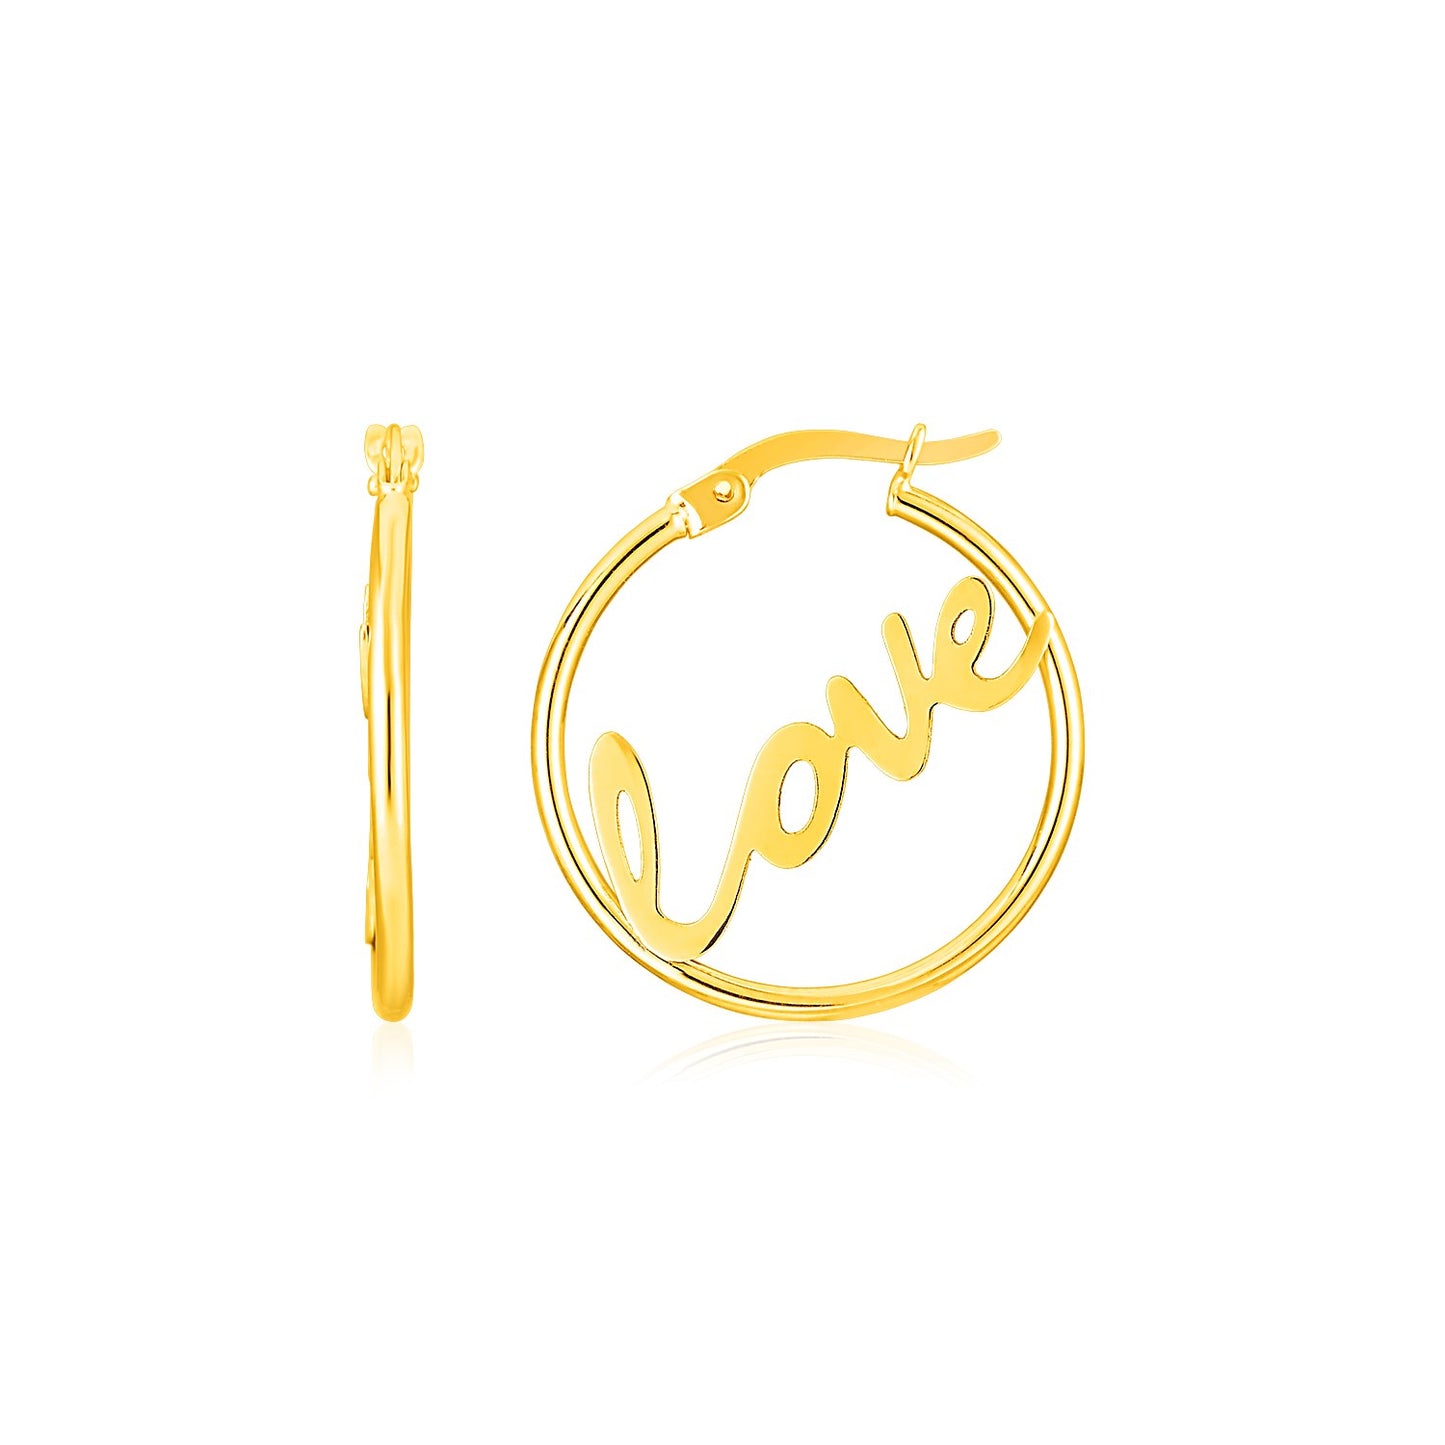 Love Hoops in 14K Yellow Gold